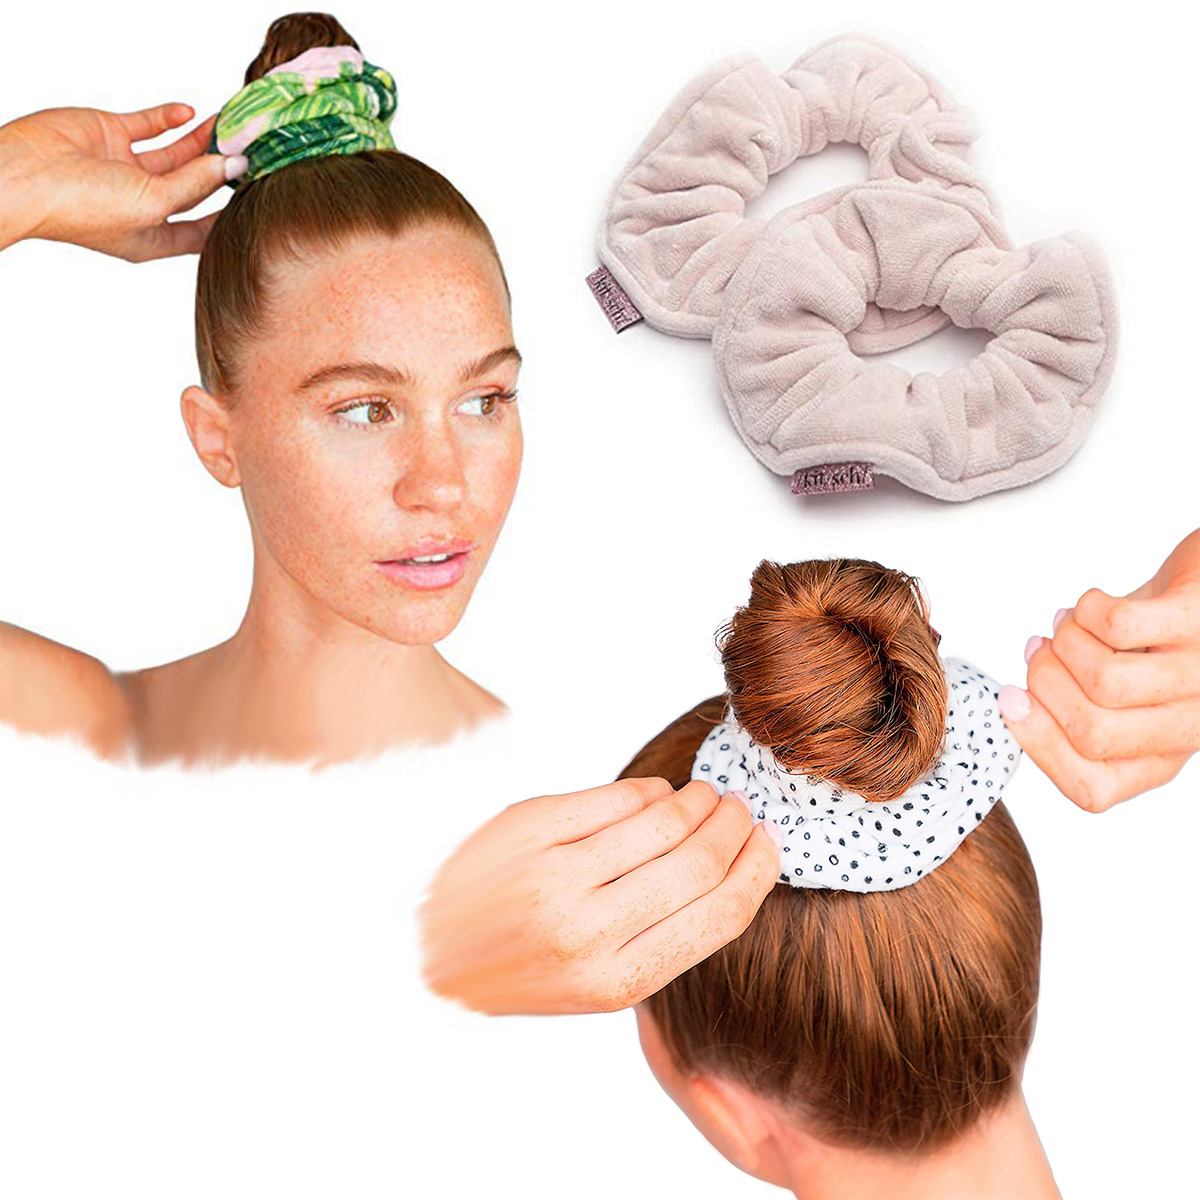 These Towel Scrunchies With 7,800+ 5-Star Reviews Dry My Hair Quickly